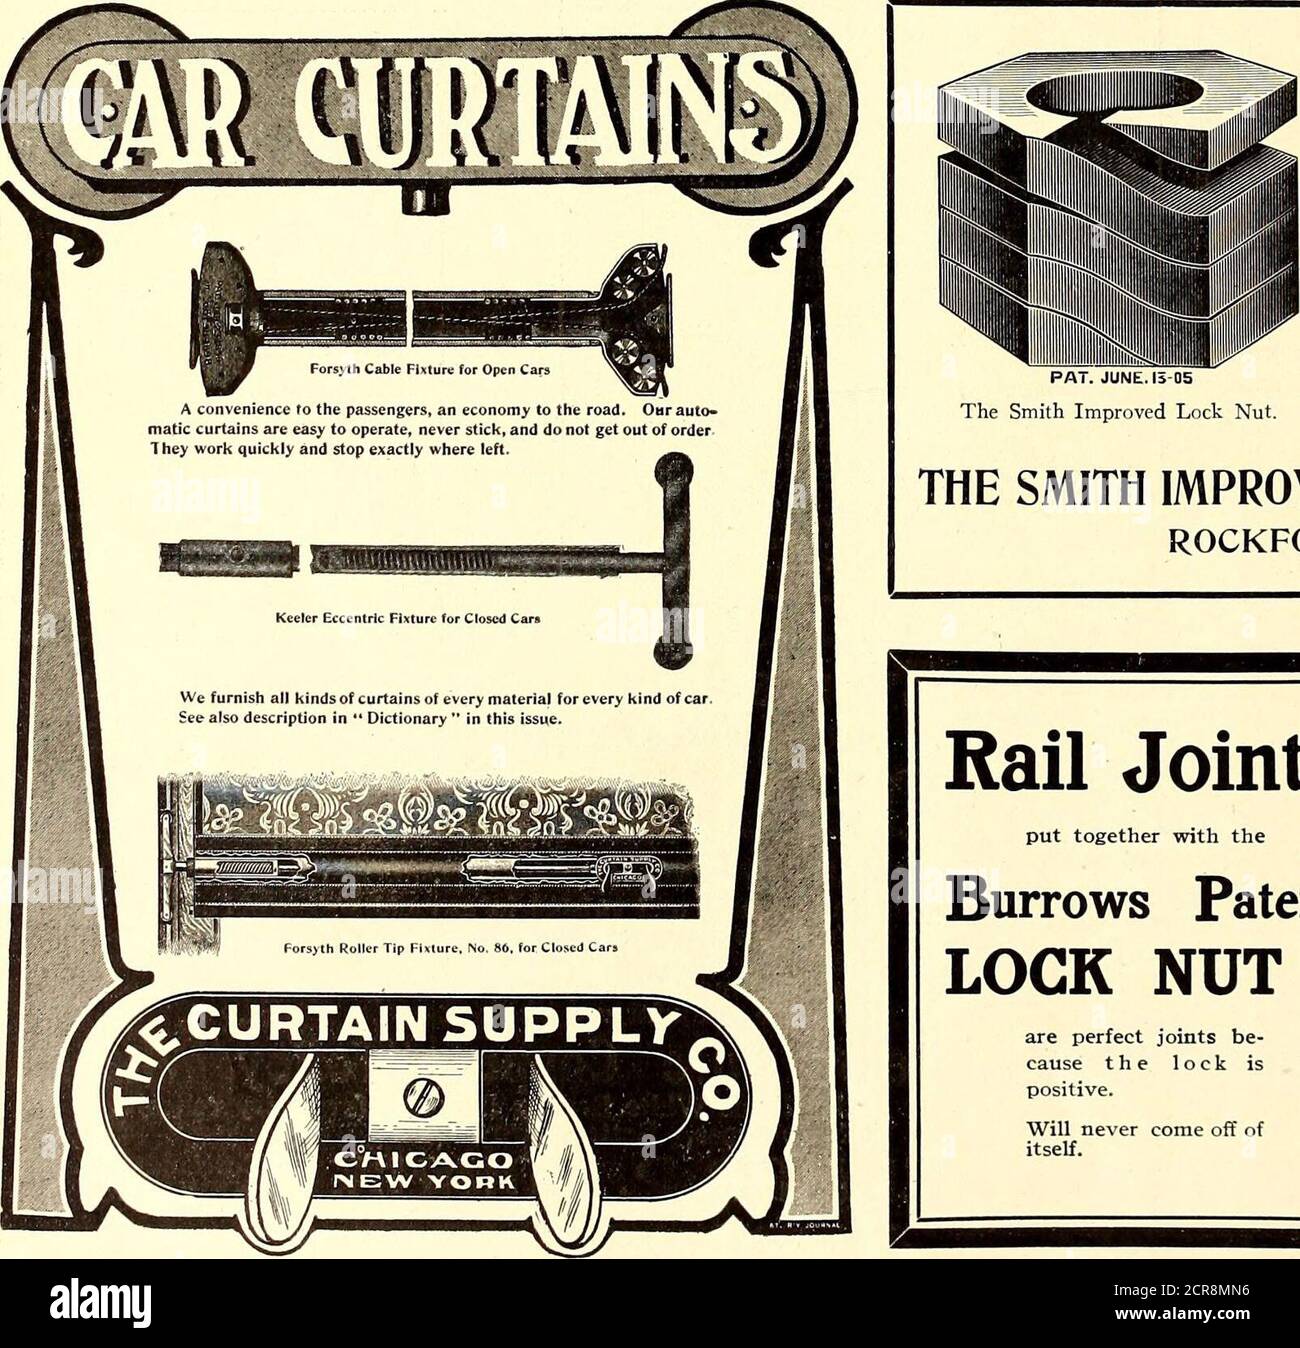 The Street railway journal . TYPE D--1. The ONE Nut that does the